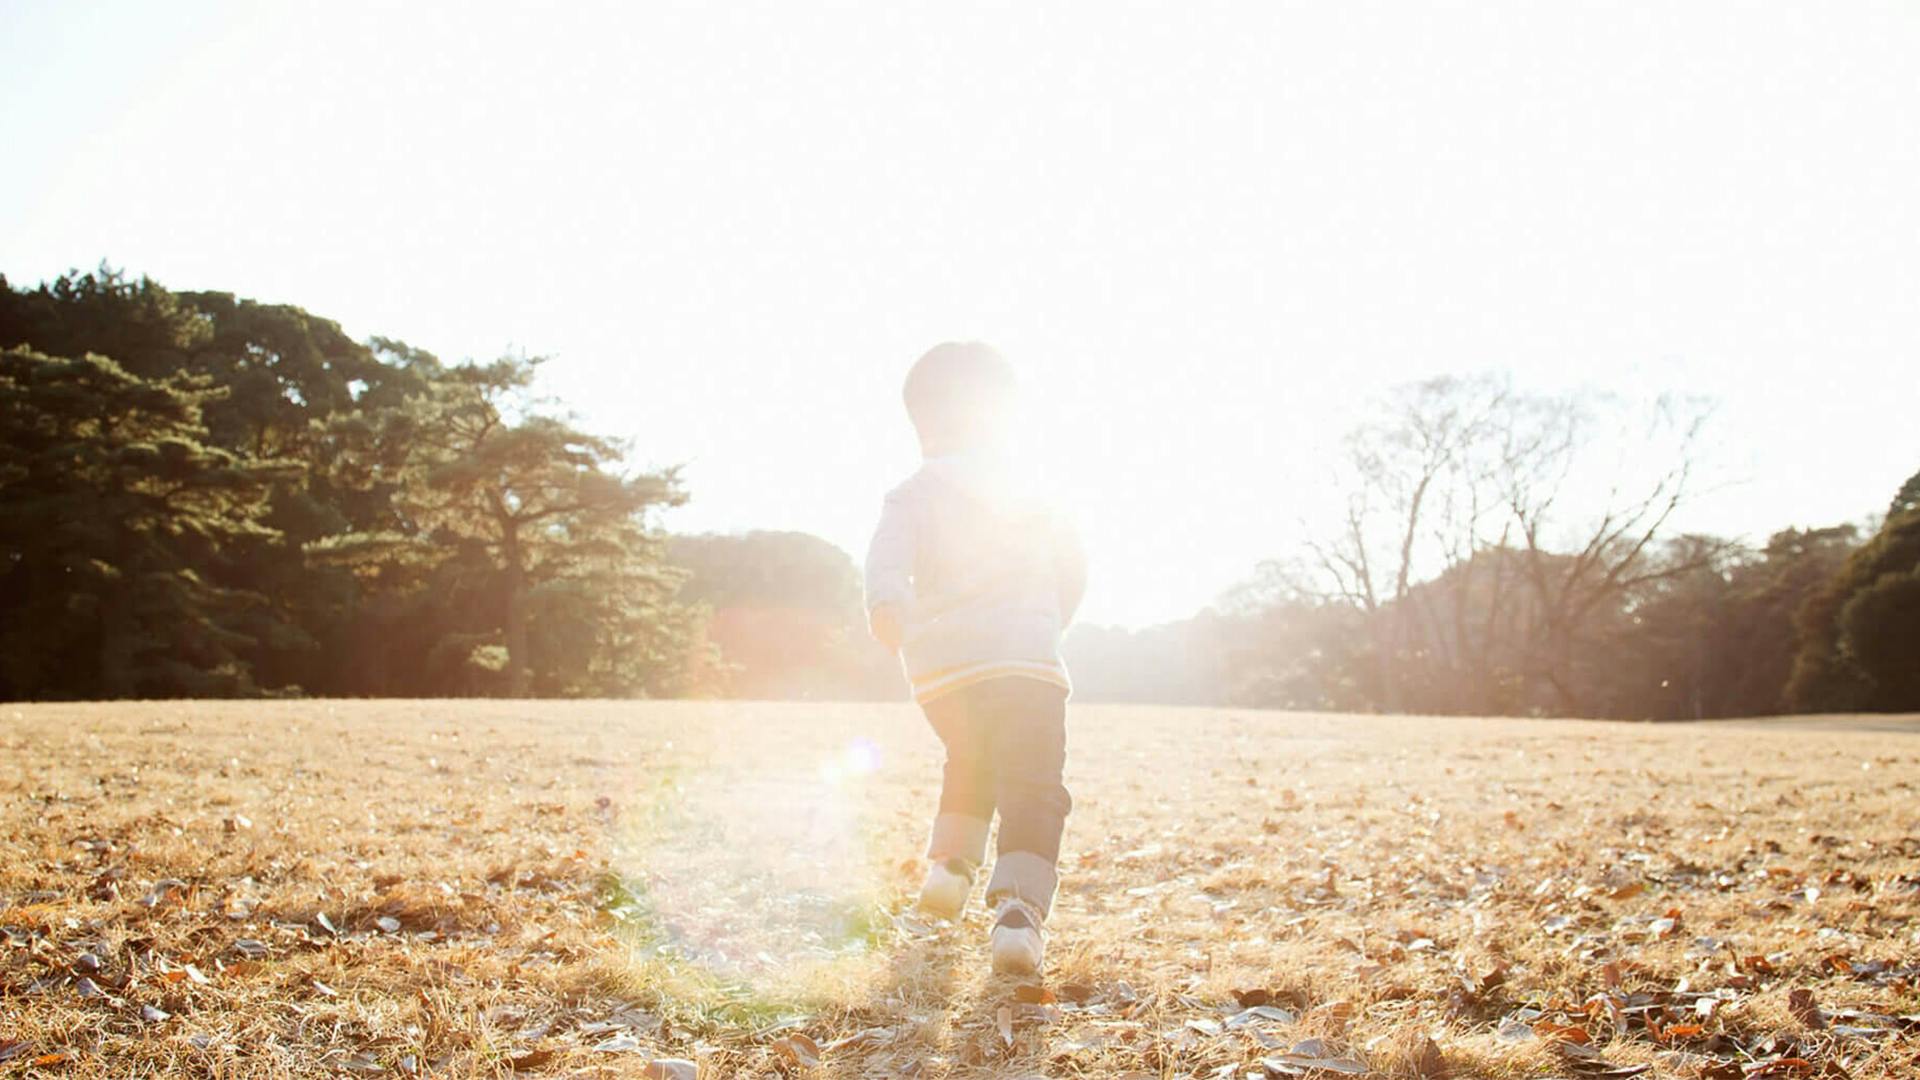 A child running through a field with a bright sun in the background